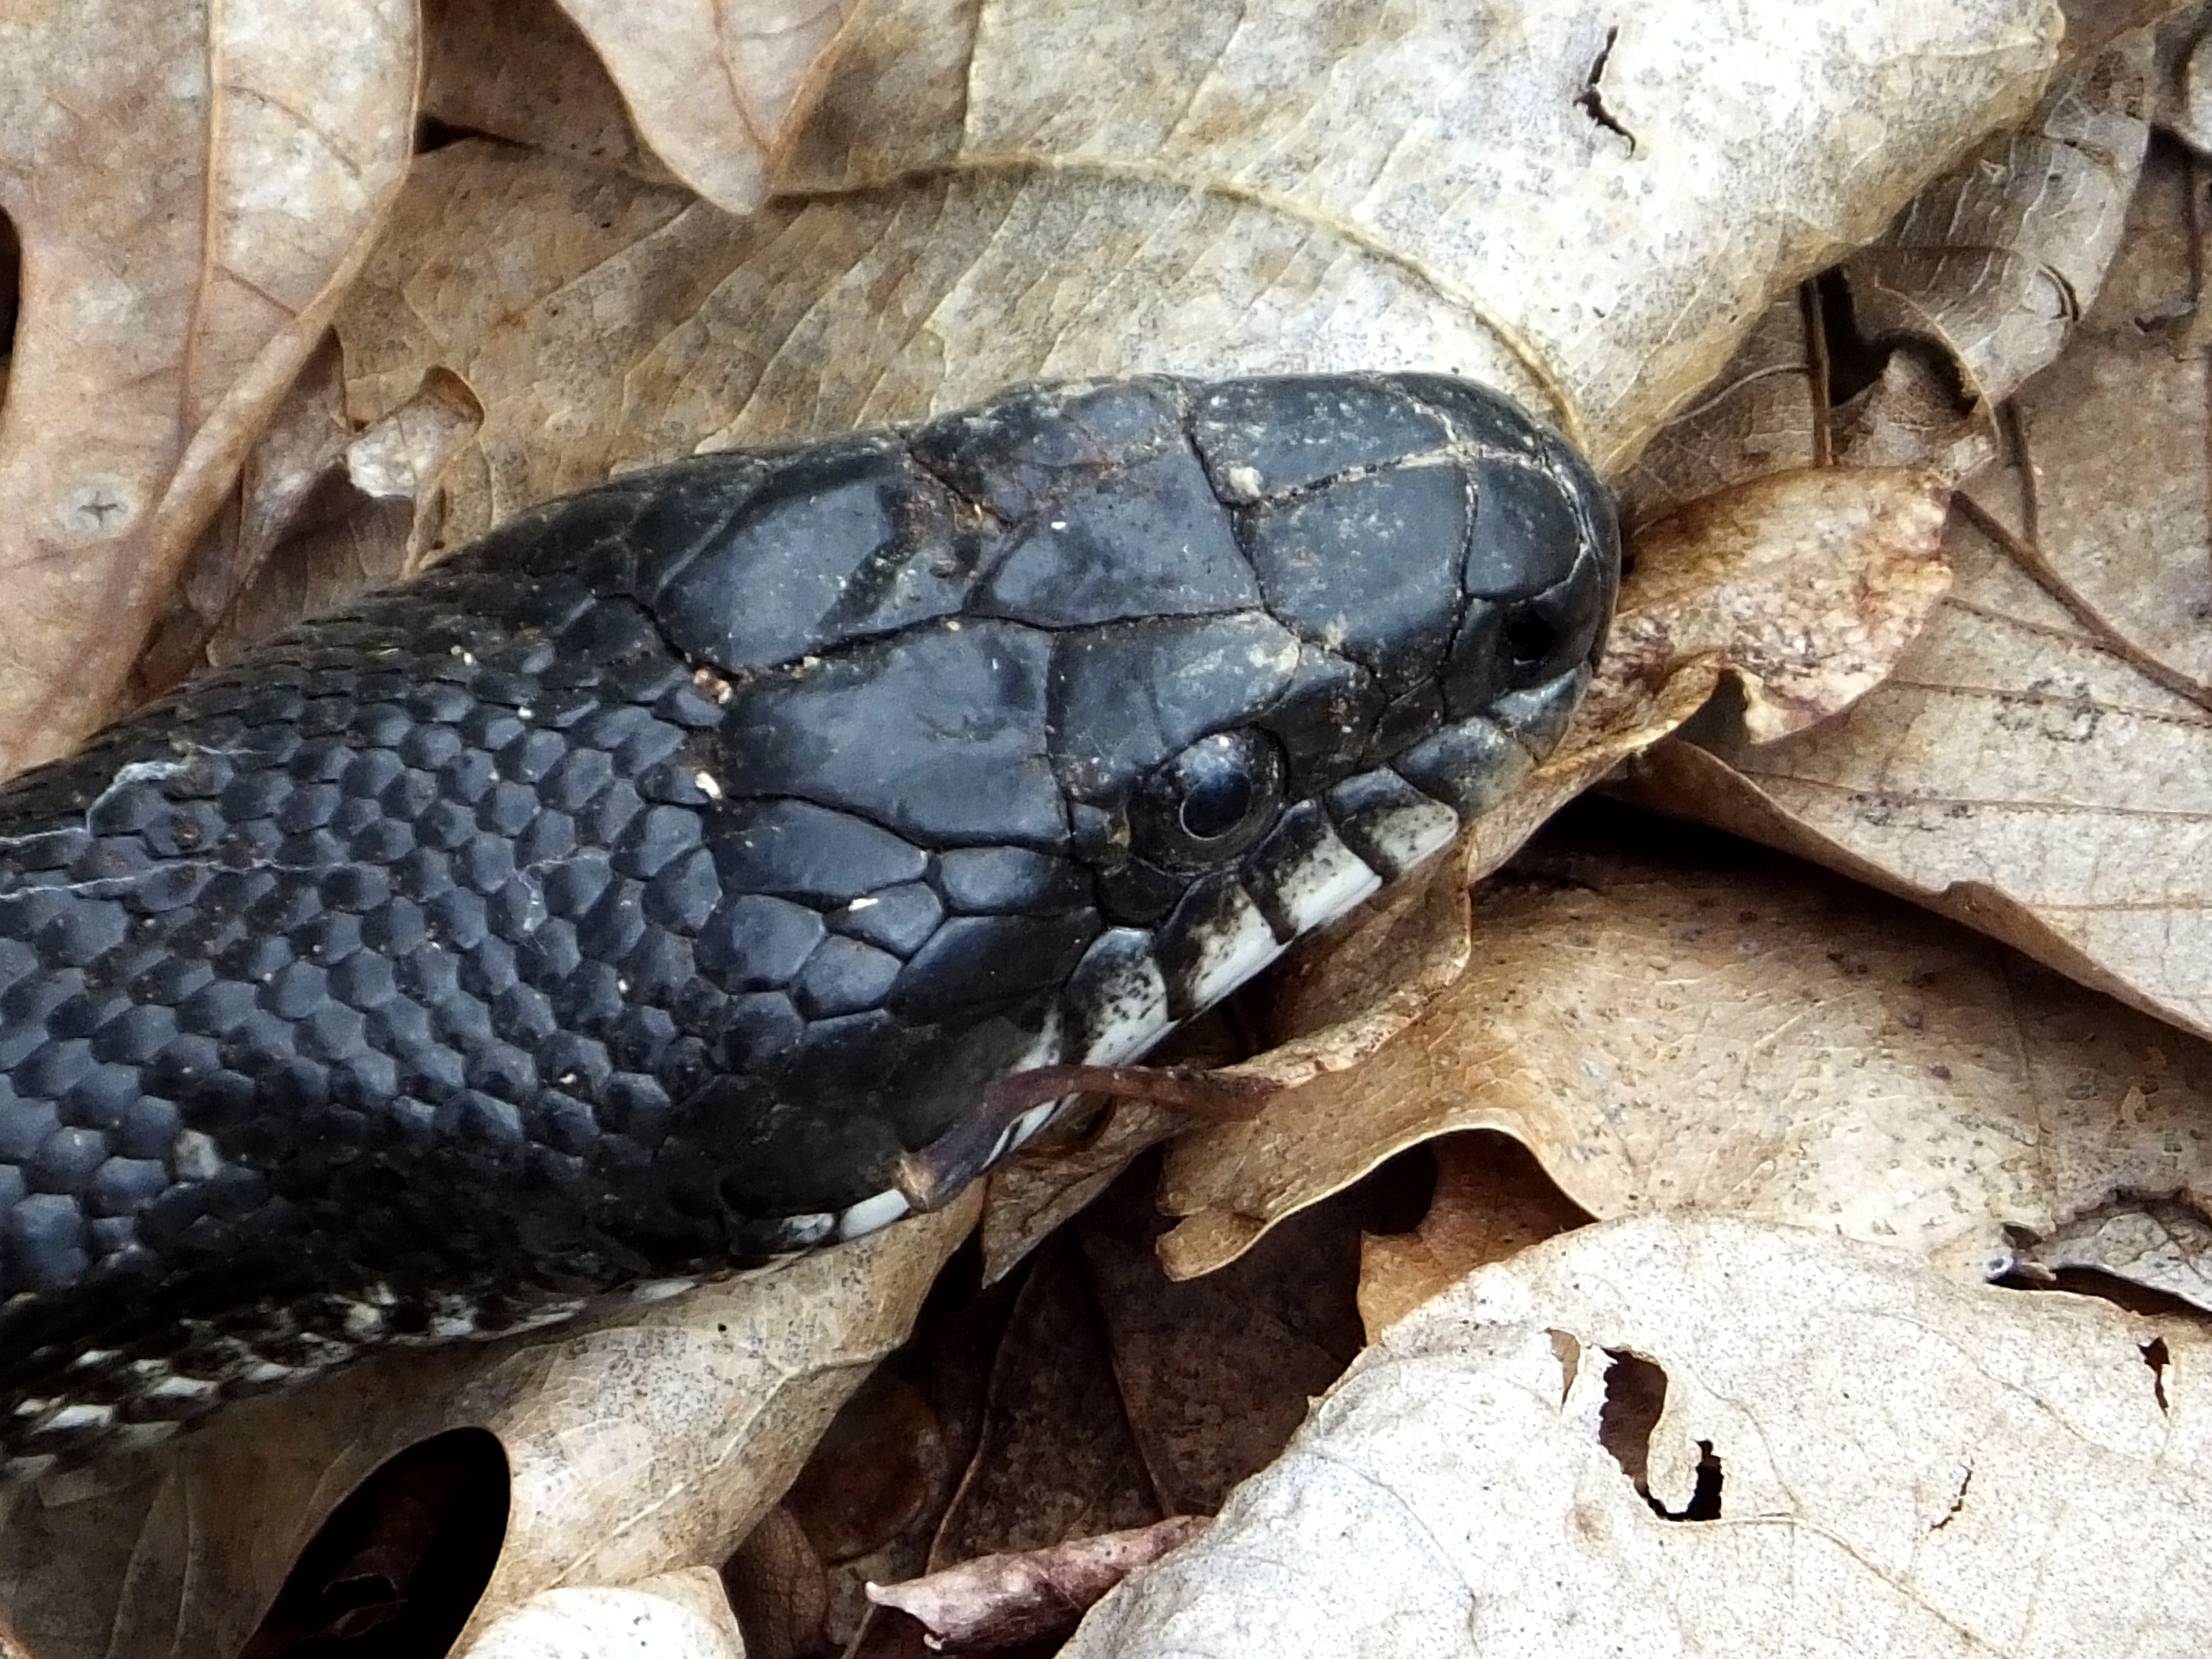 Black rat snake | The Life of Your Time